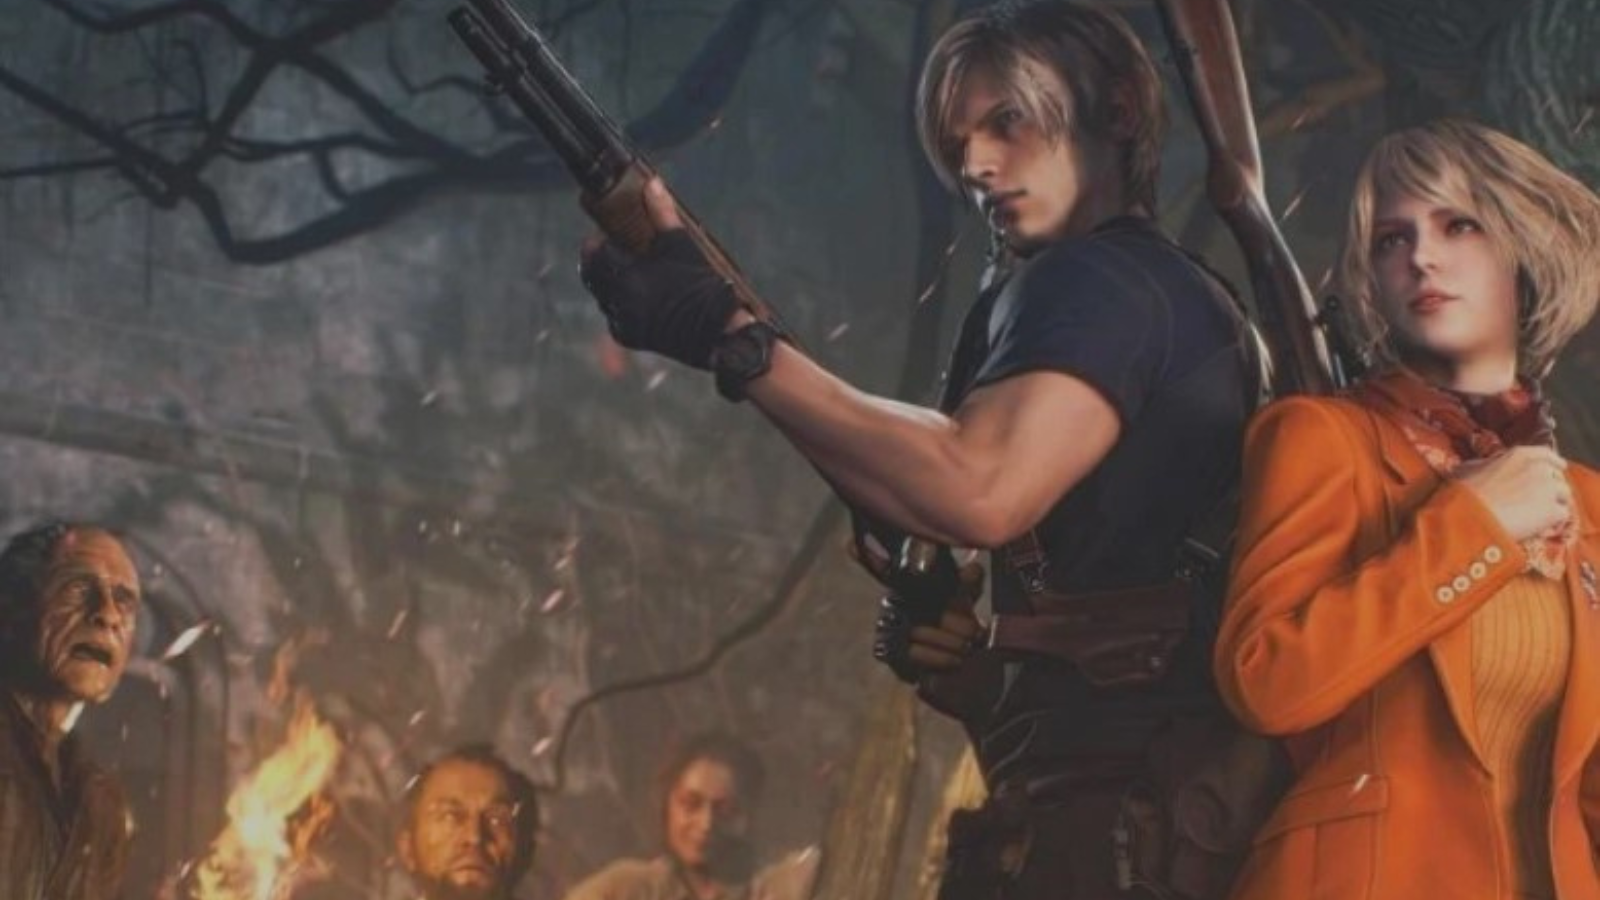 A VR Mod is already live for the Resident Evil 4 Remake